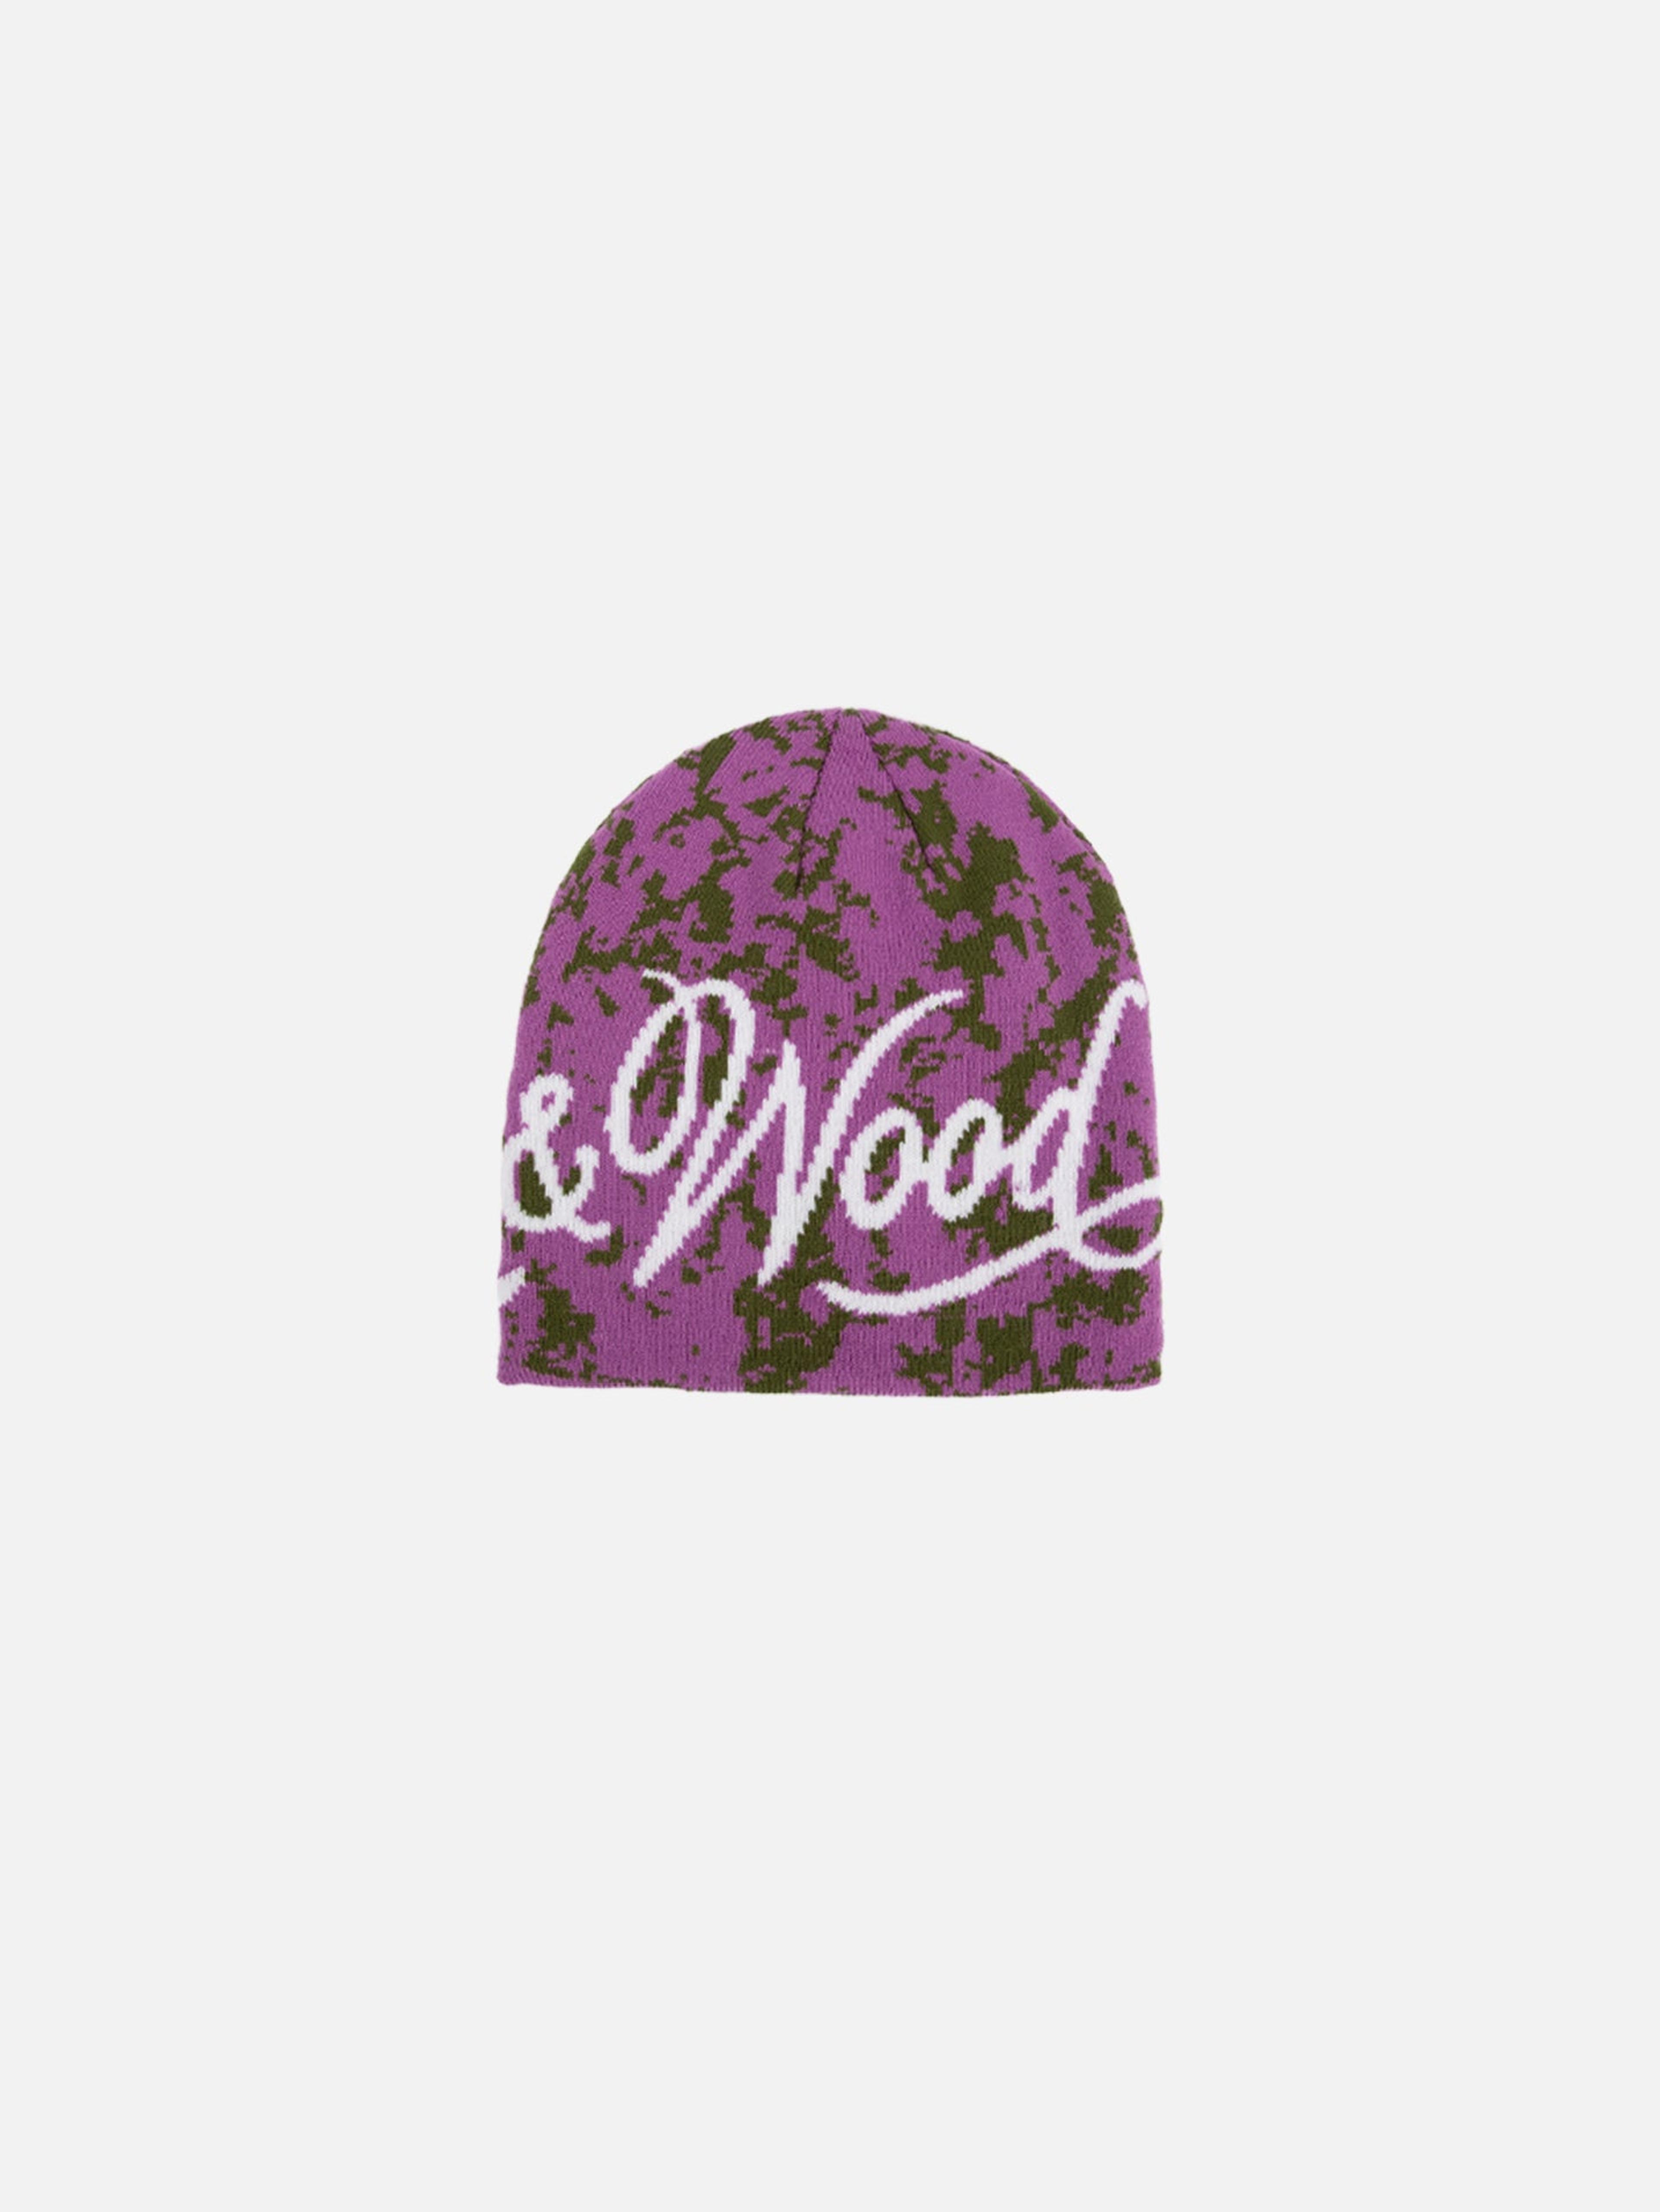 Alternate View 1 of Thermal Camo Skully - Purple